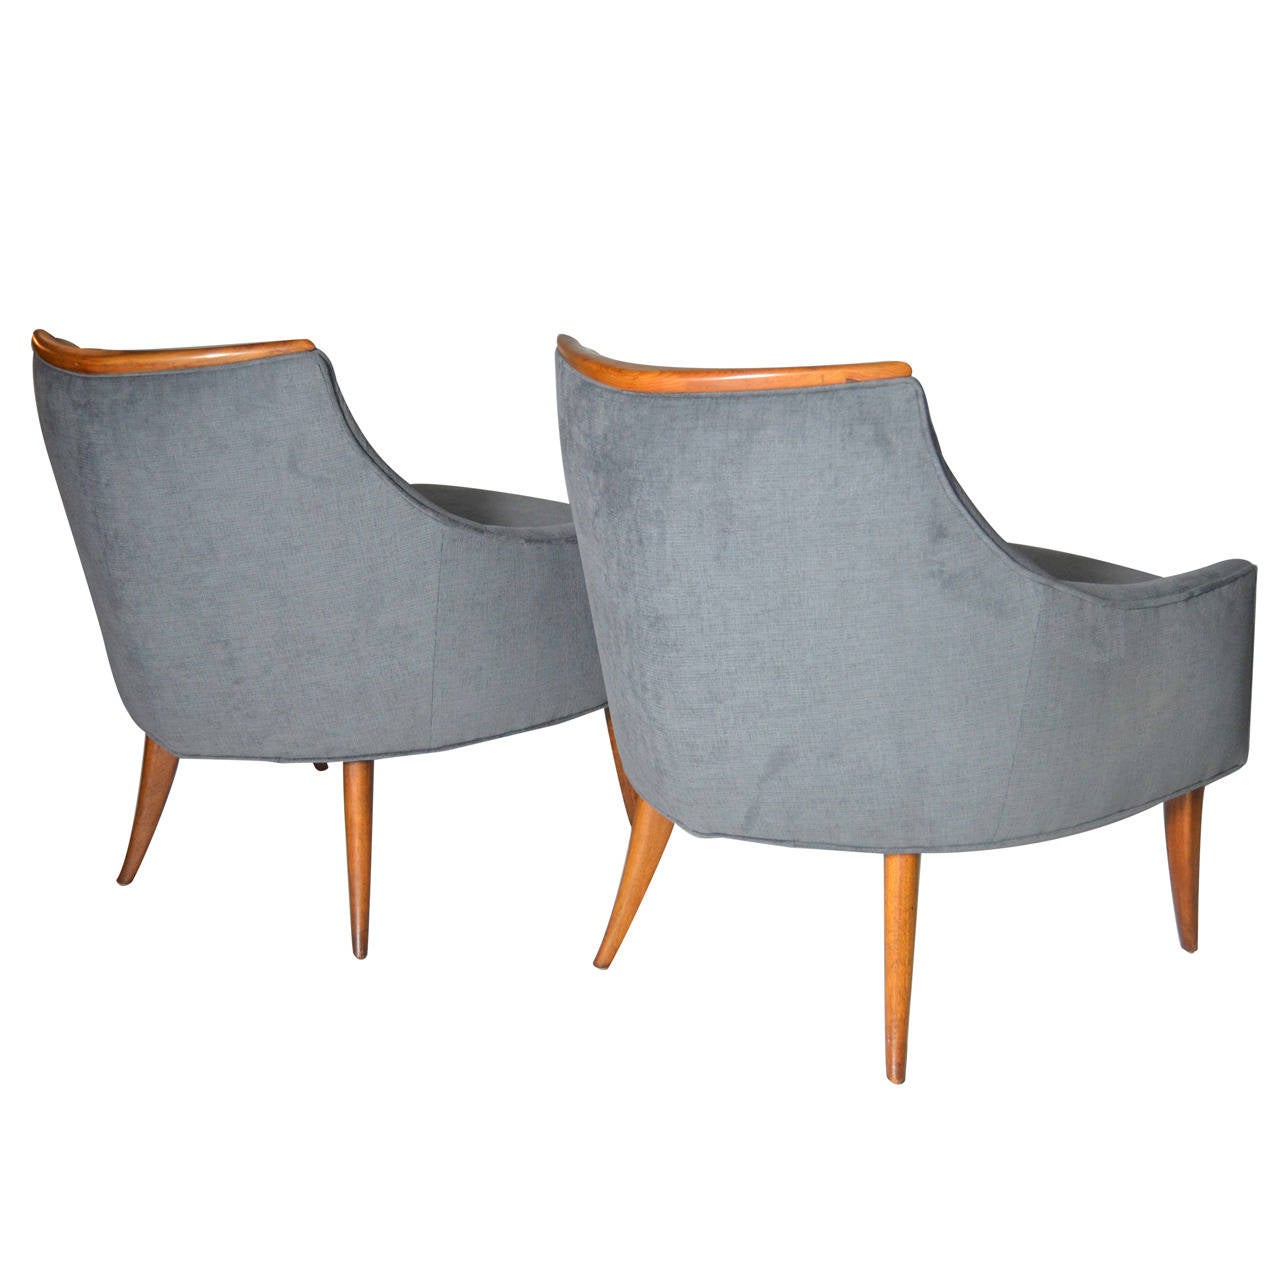 Stunningly pair of Danish Modern lounge chairs. This pair features a rare boomerang-shaped teak wood trim, and saber legs. Newly upholstered in grey chenille.